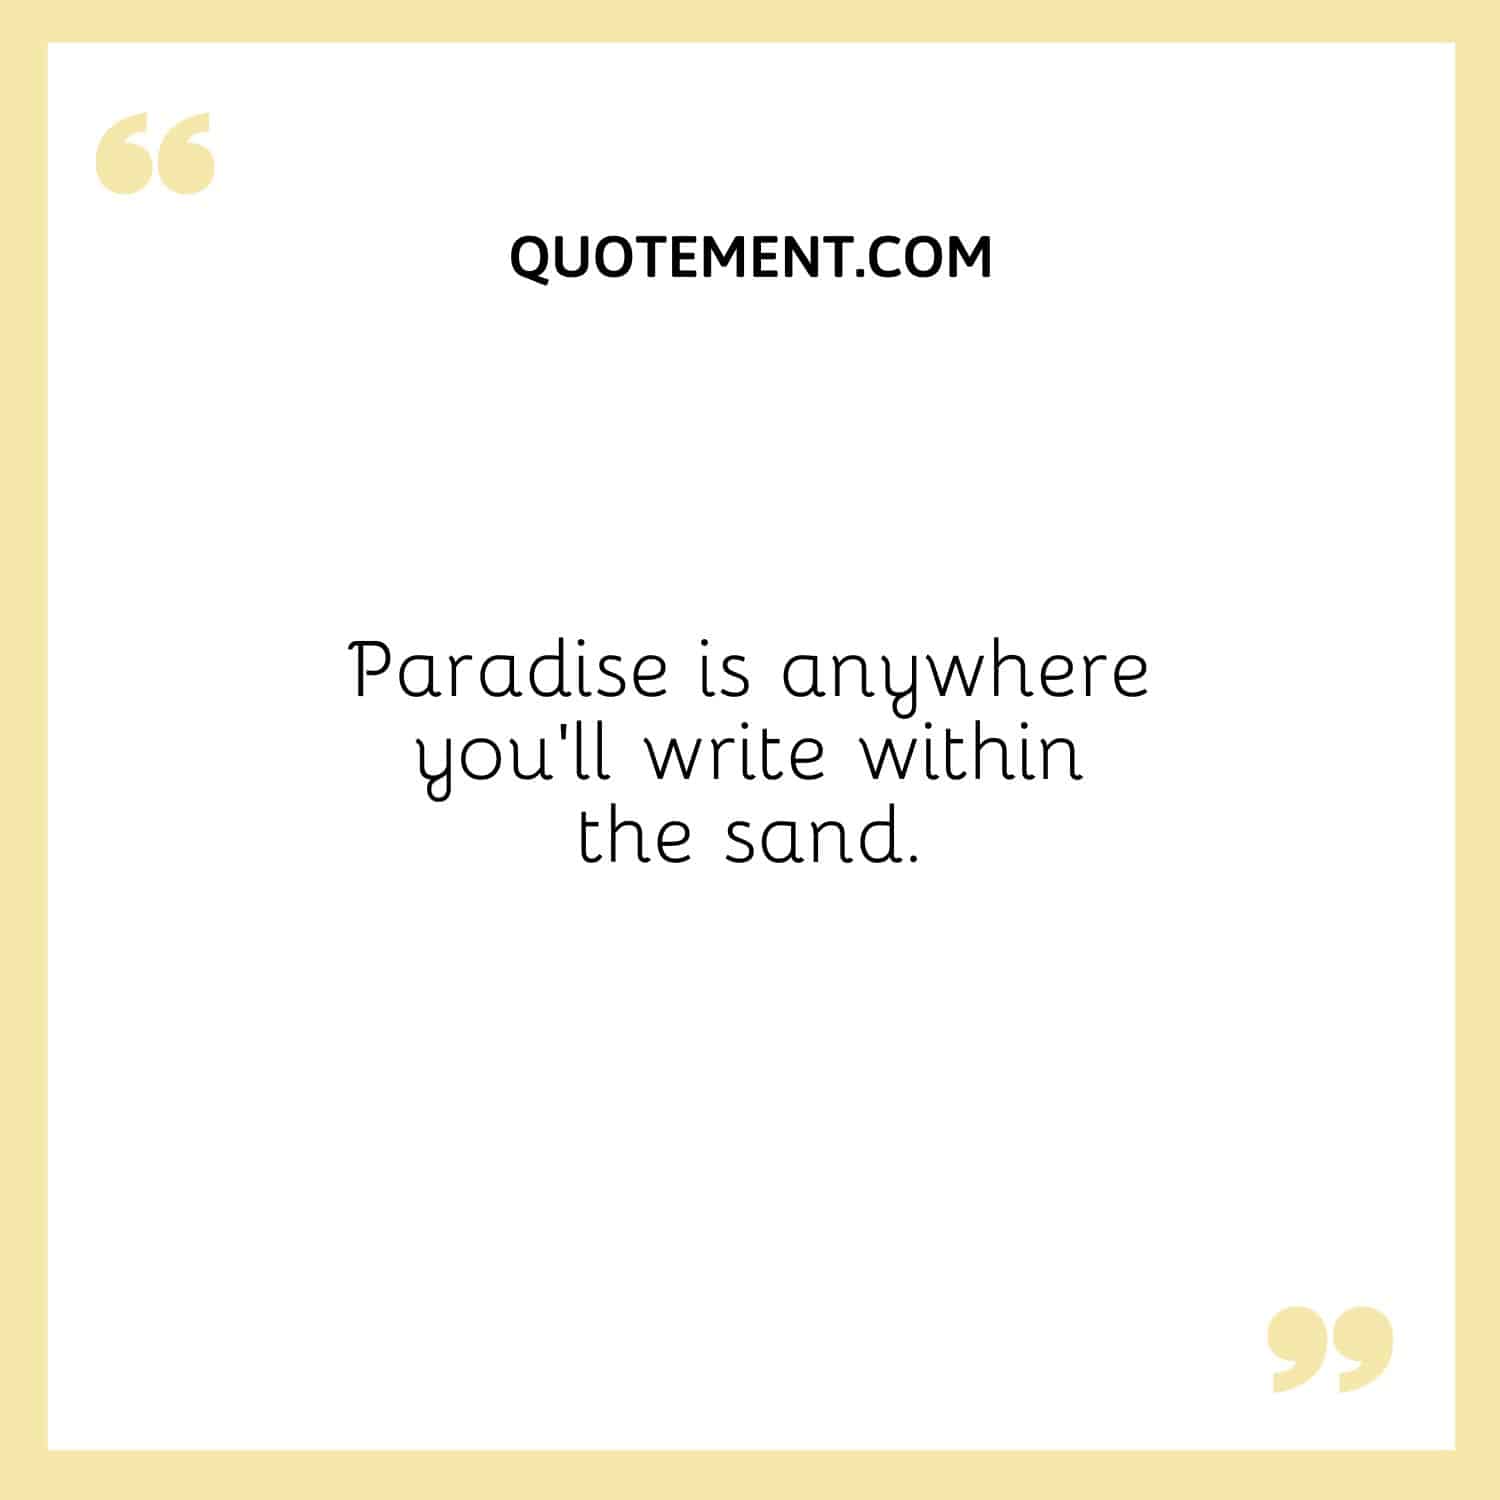 Paradise is anywhere you’ll write within the sand.